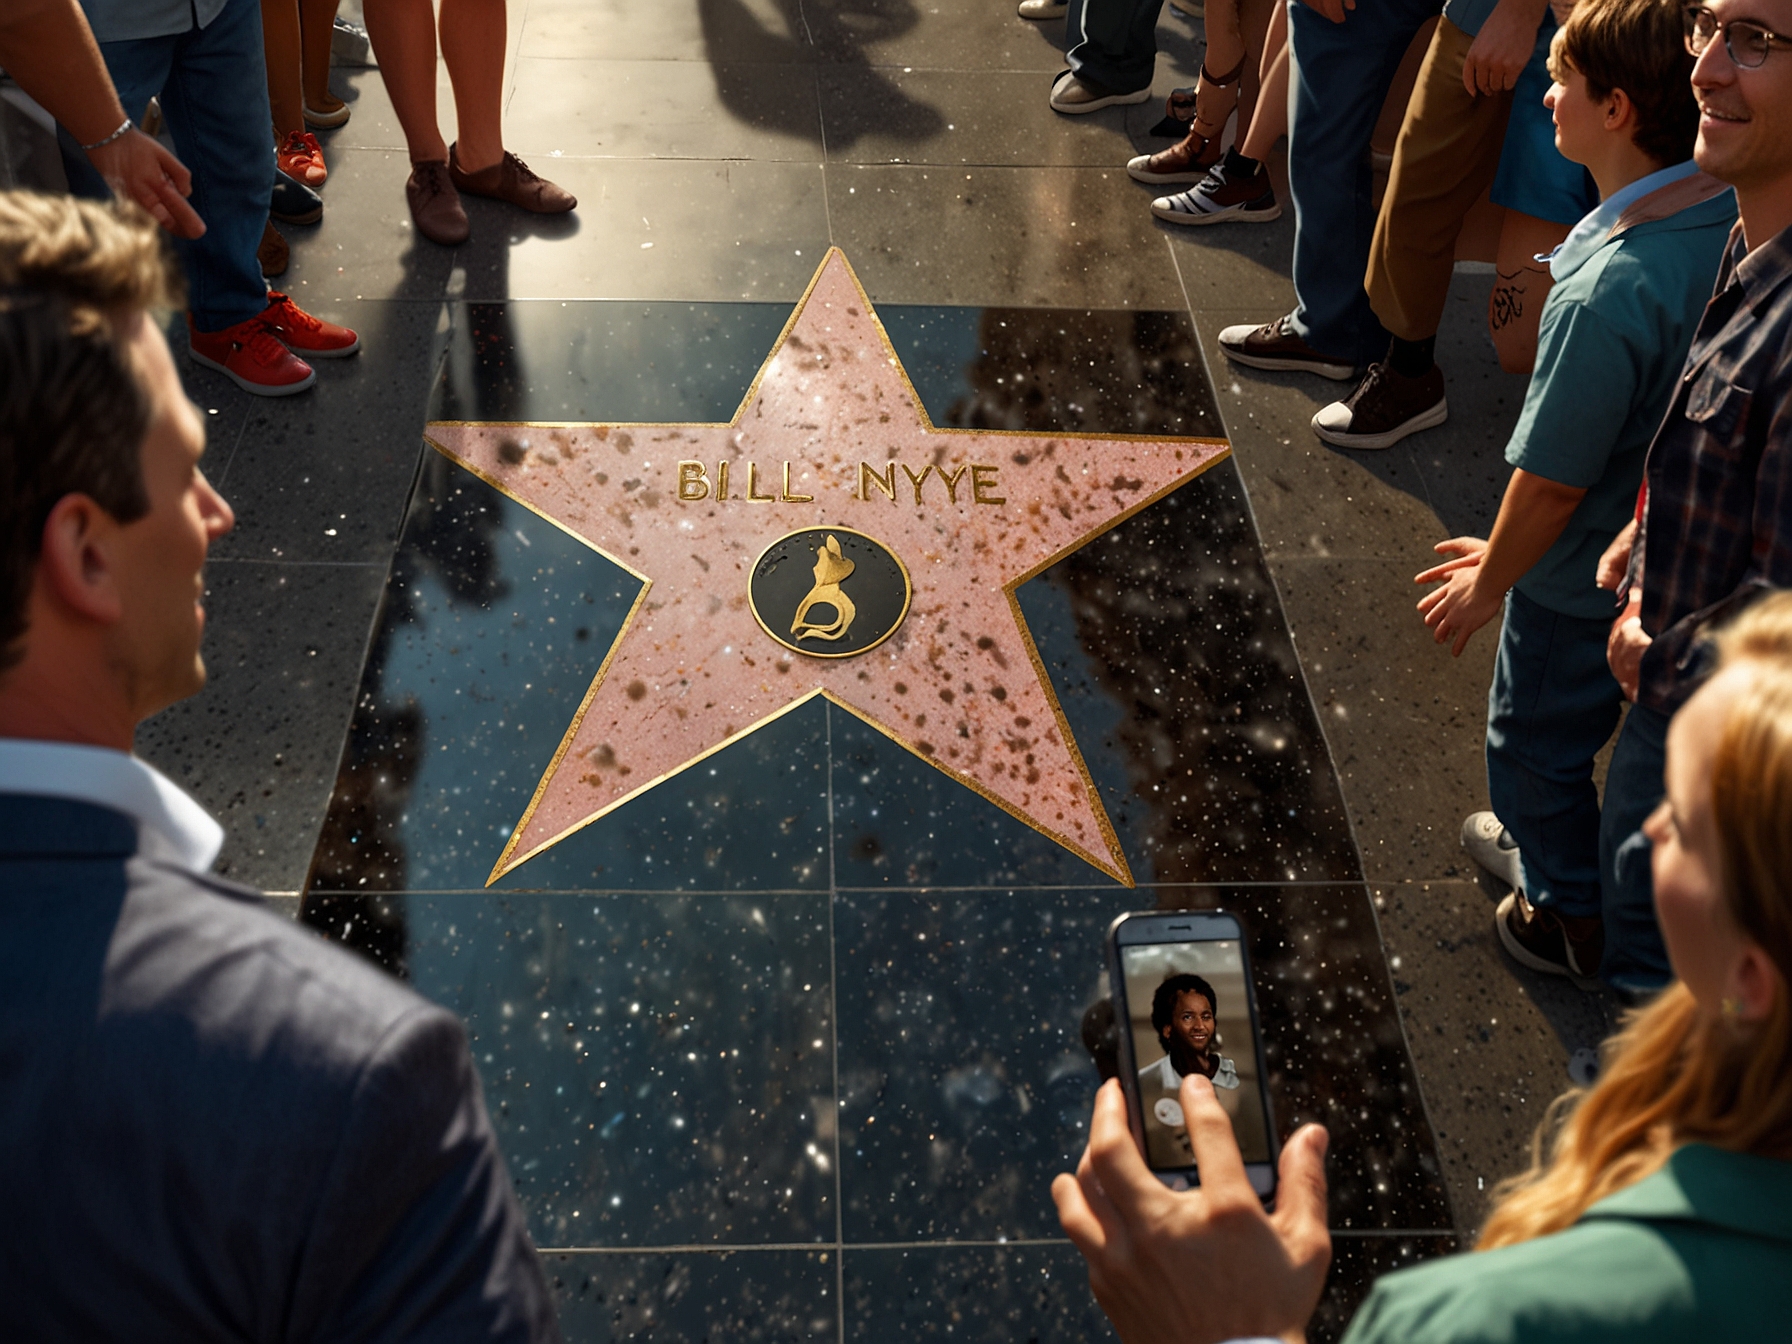 A close-up of Bill Nye's Hollywood Walk of Fame star, surrounded by a crowd of admirers and flashing cameras, highlighting the public's appreciation for his impact on popular science.